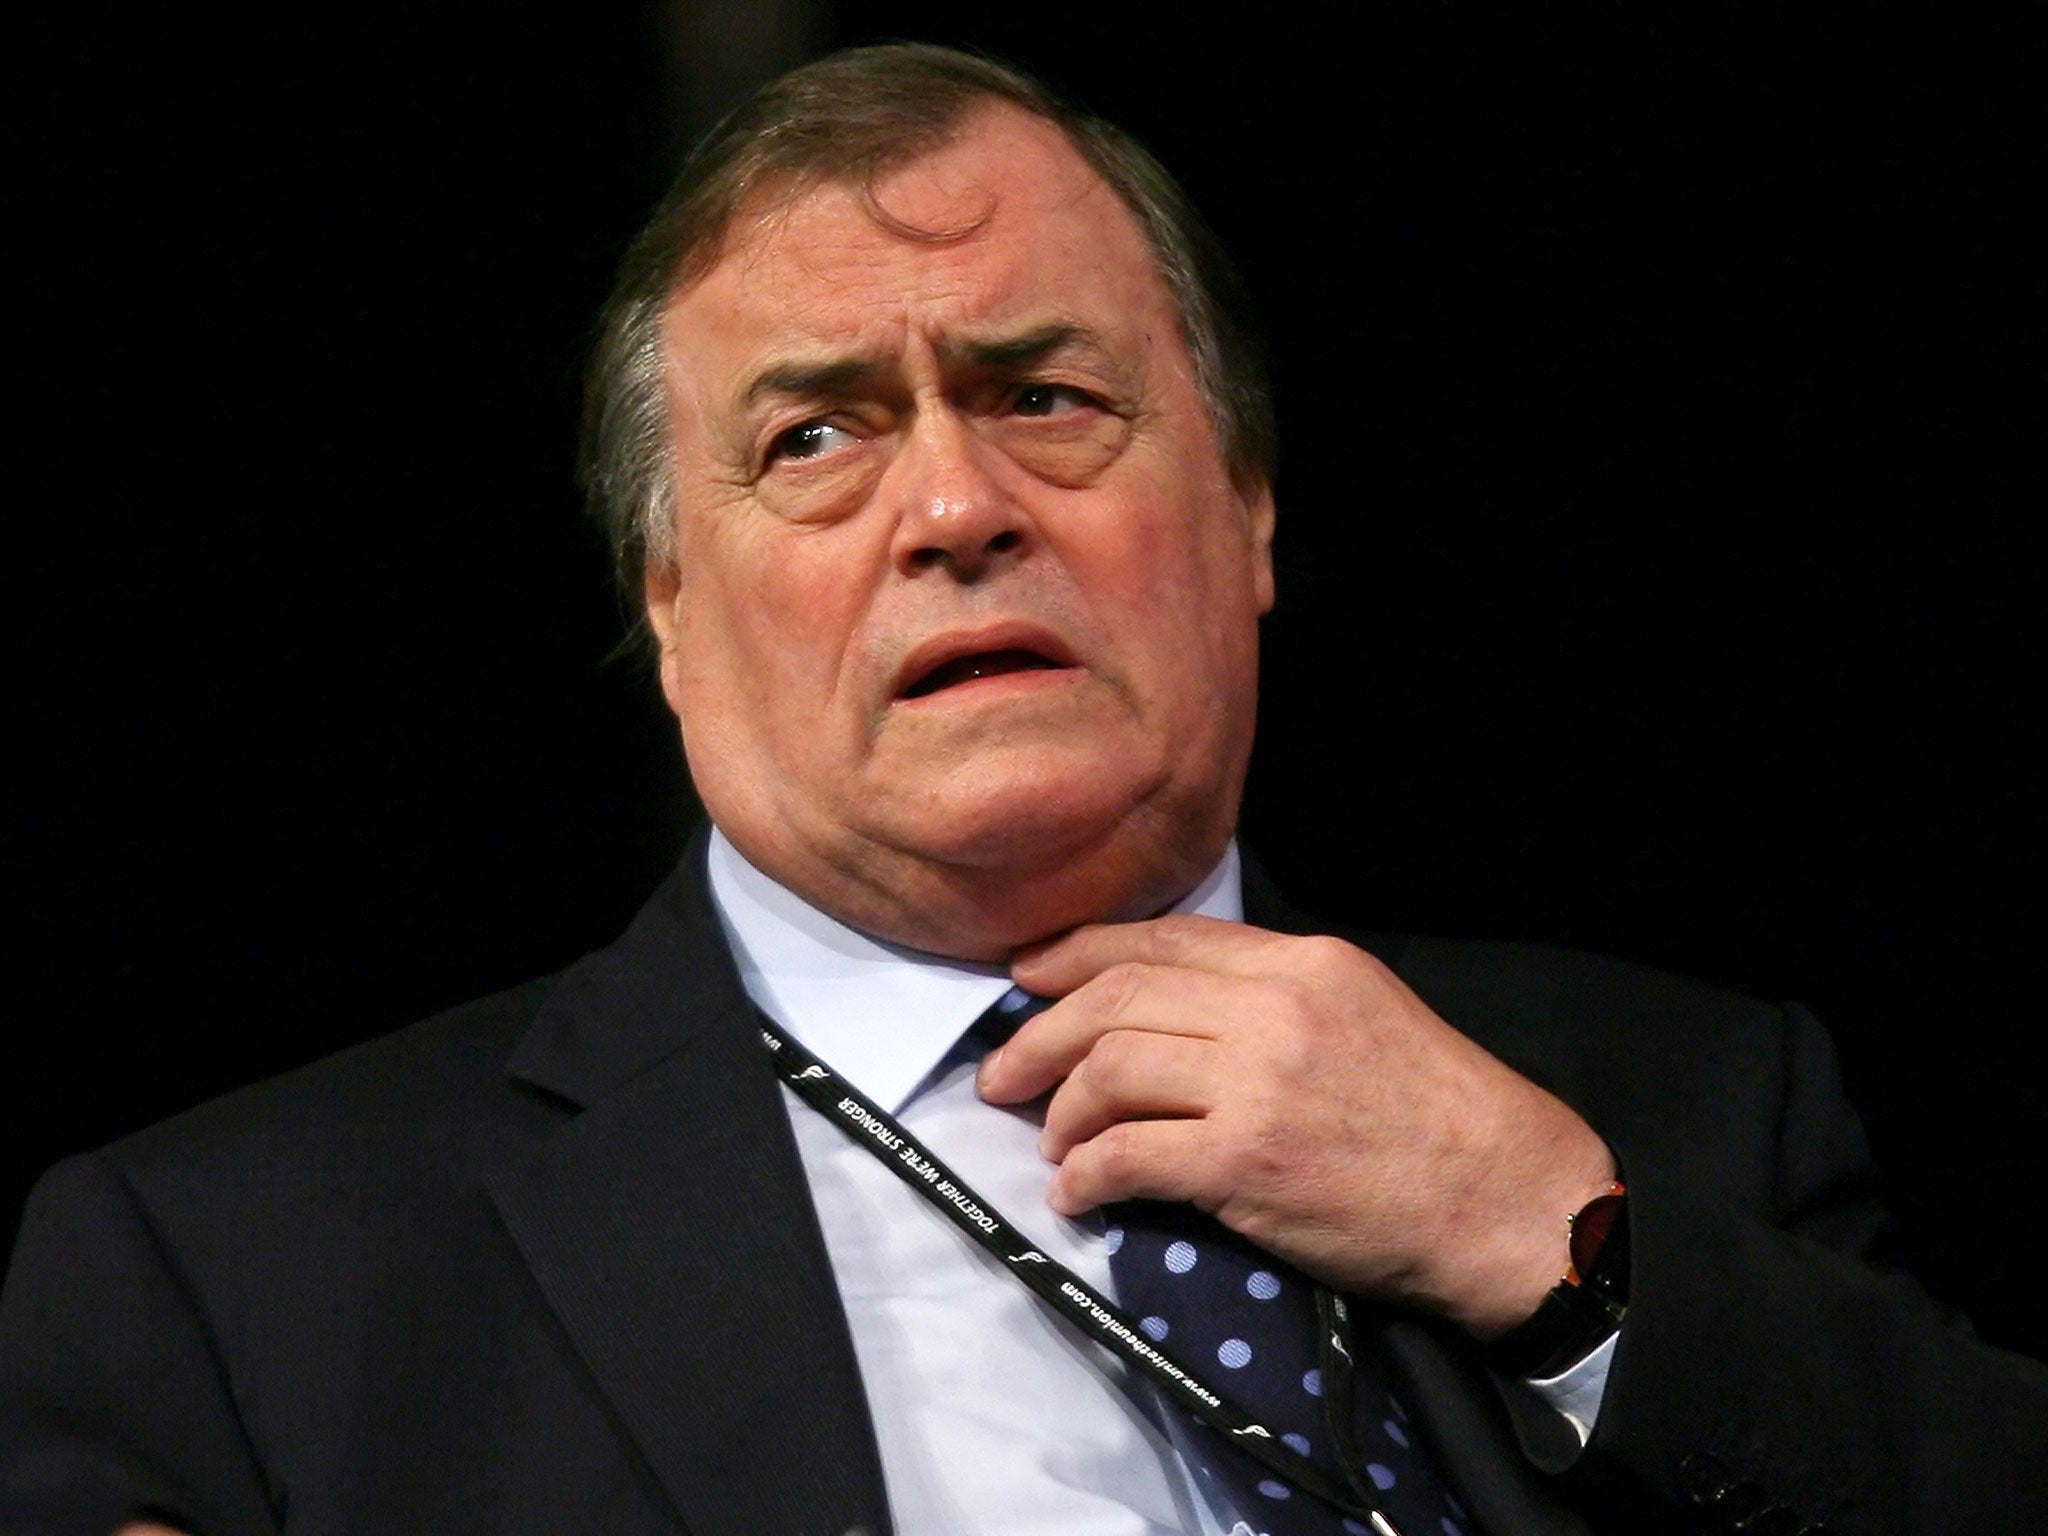 Lord Prescott will not be able to drive until the end of November 